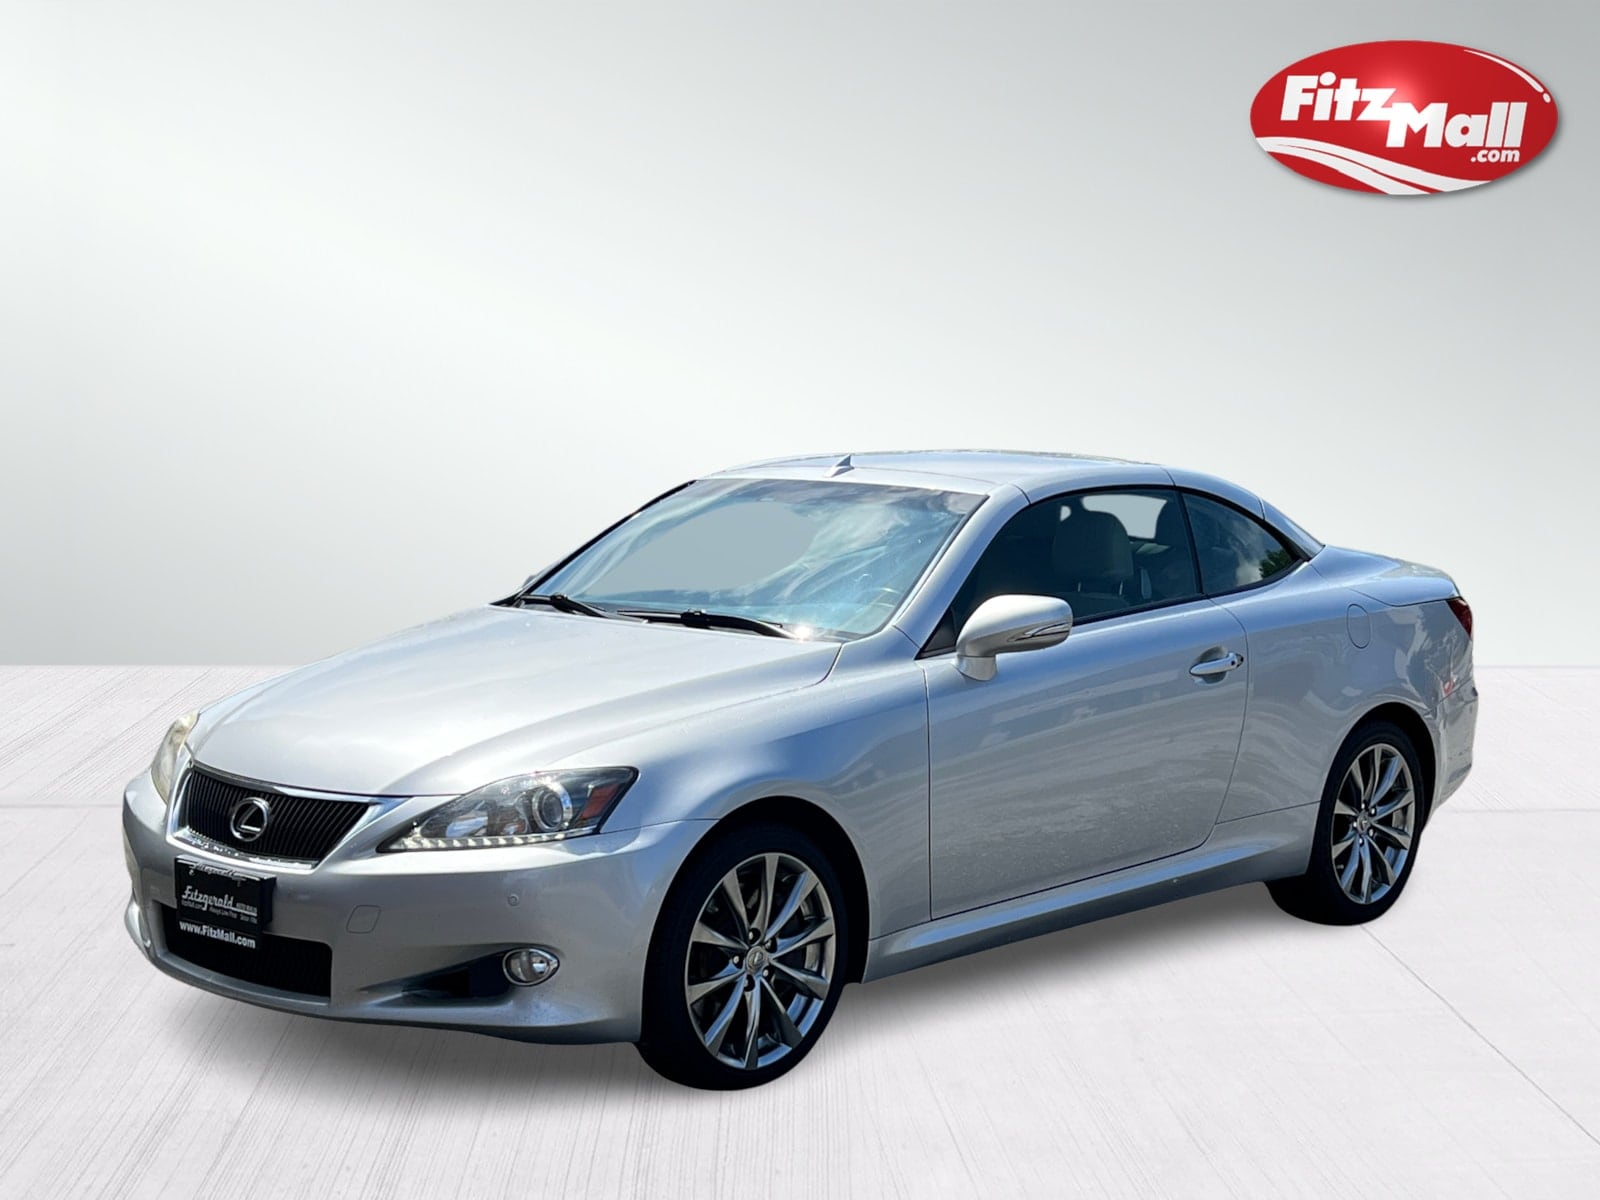 Used 2014 LEXUS IS 350C For Sale at FITZGERALD MITSUBISHI | VIN:  JTHFE2C29E2510622